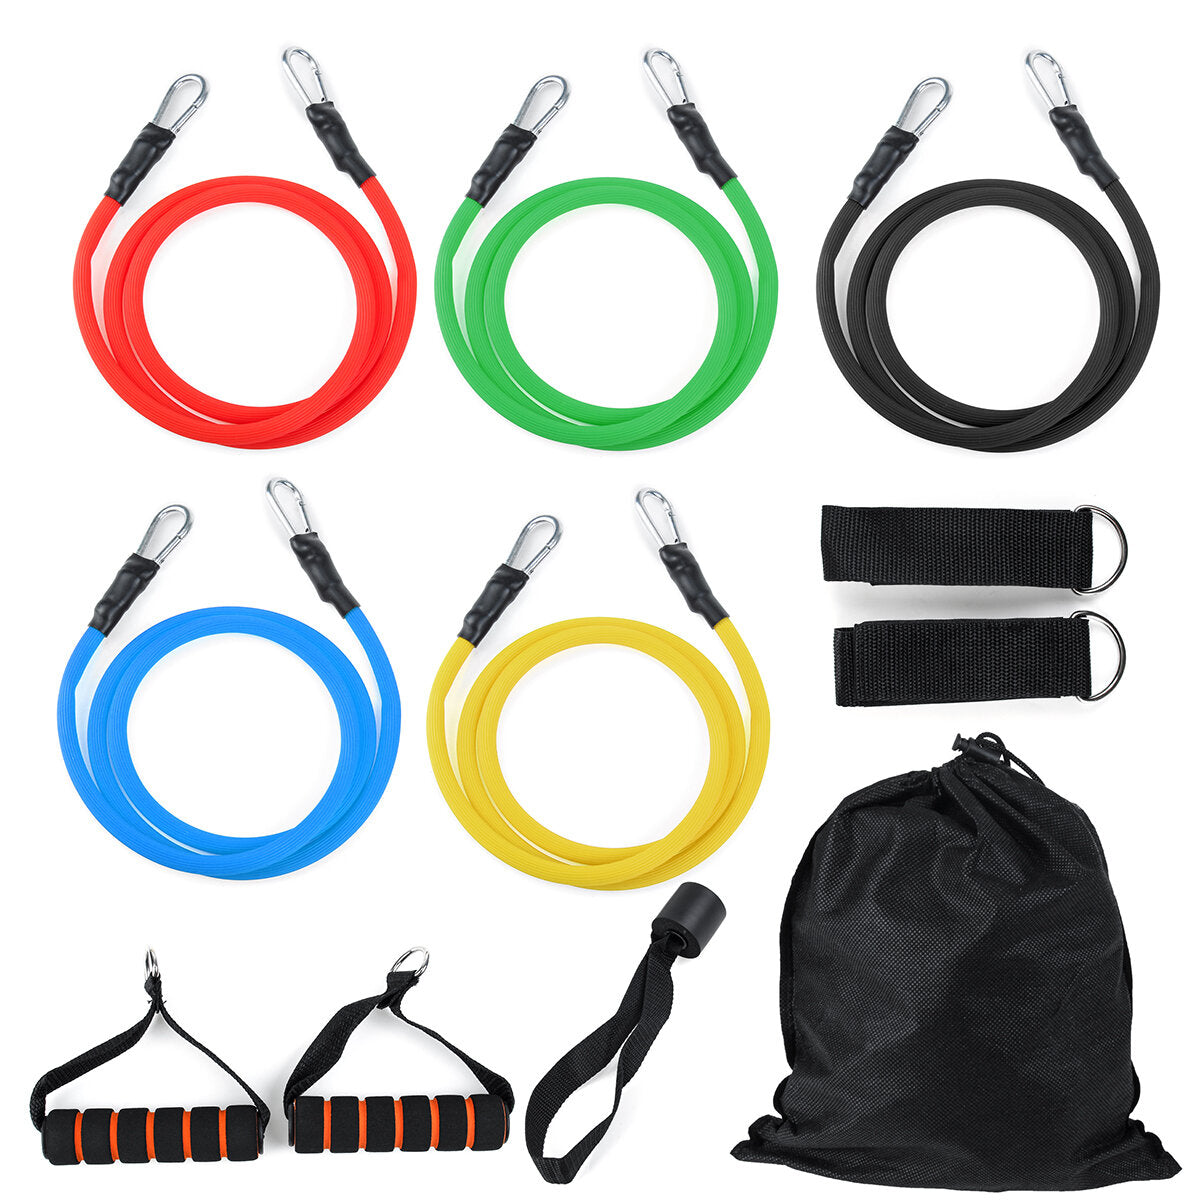 11pc Resistance Bands Set Home Fitness Exercise Straps Gym Training Strength Pull Tubes